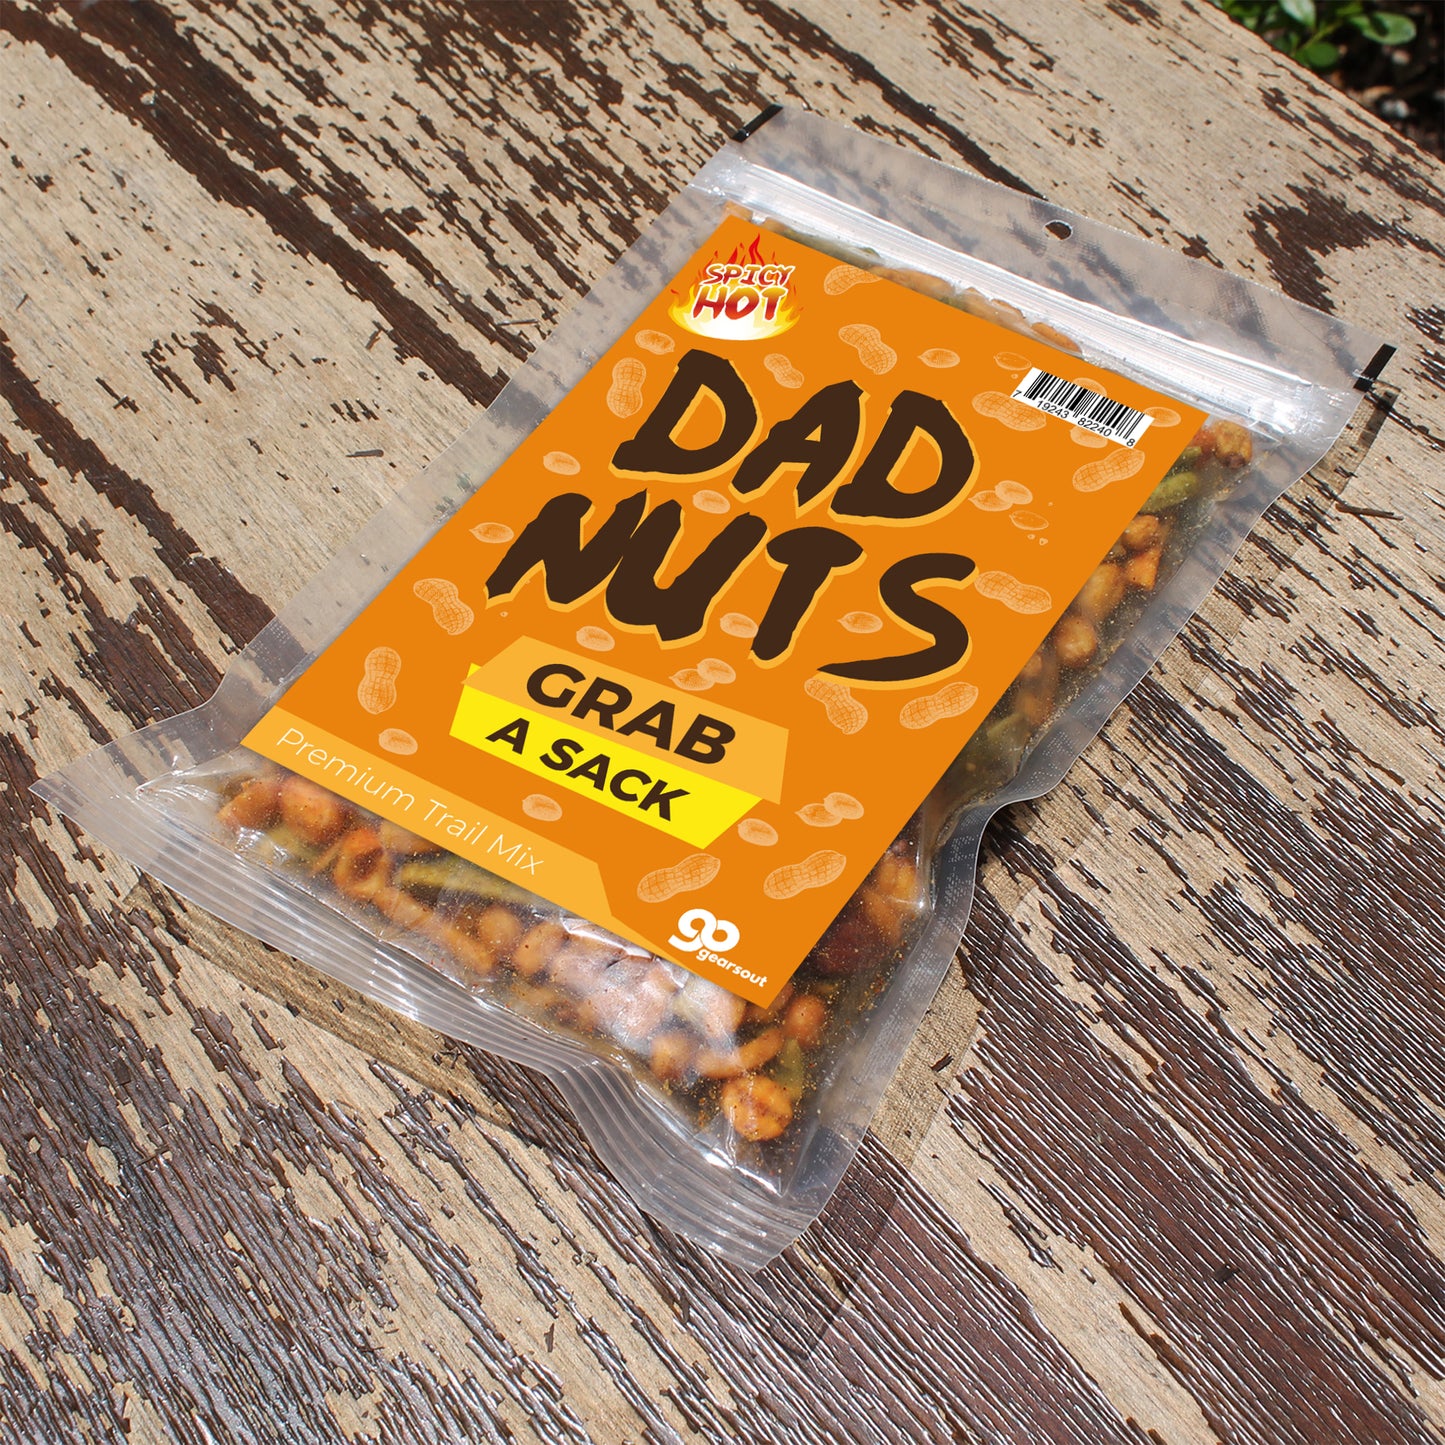 Spicy Hot Dad Nuts Trail Mix